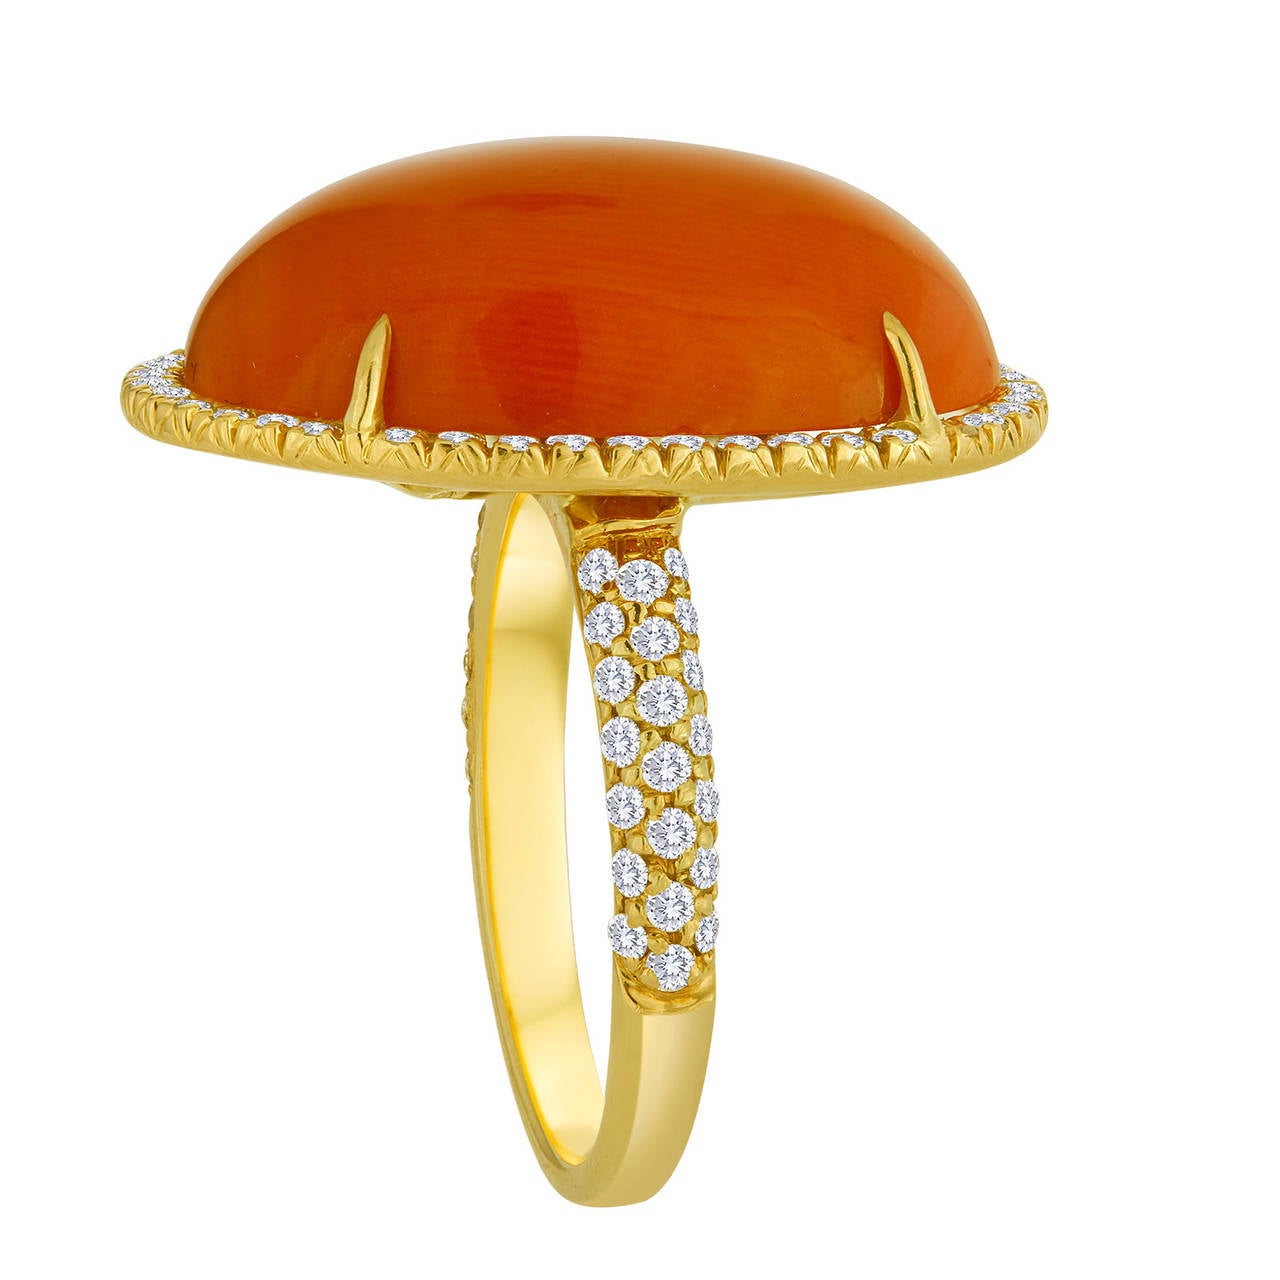 This simple ring displays an oval cabochon coral center stone that is prong-set in an 18k yellow gold setting. Surrounding the coral is a row of pave white diamonds, along with a series of white diamonds that run halfway down the shank of the ring.